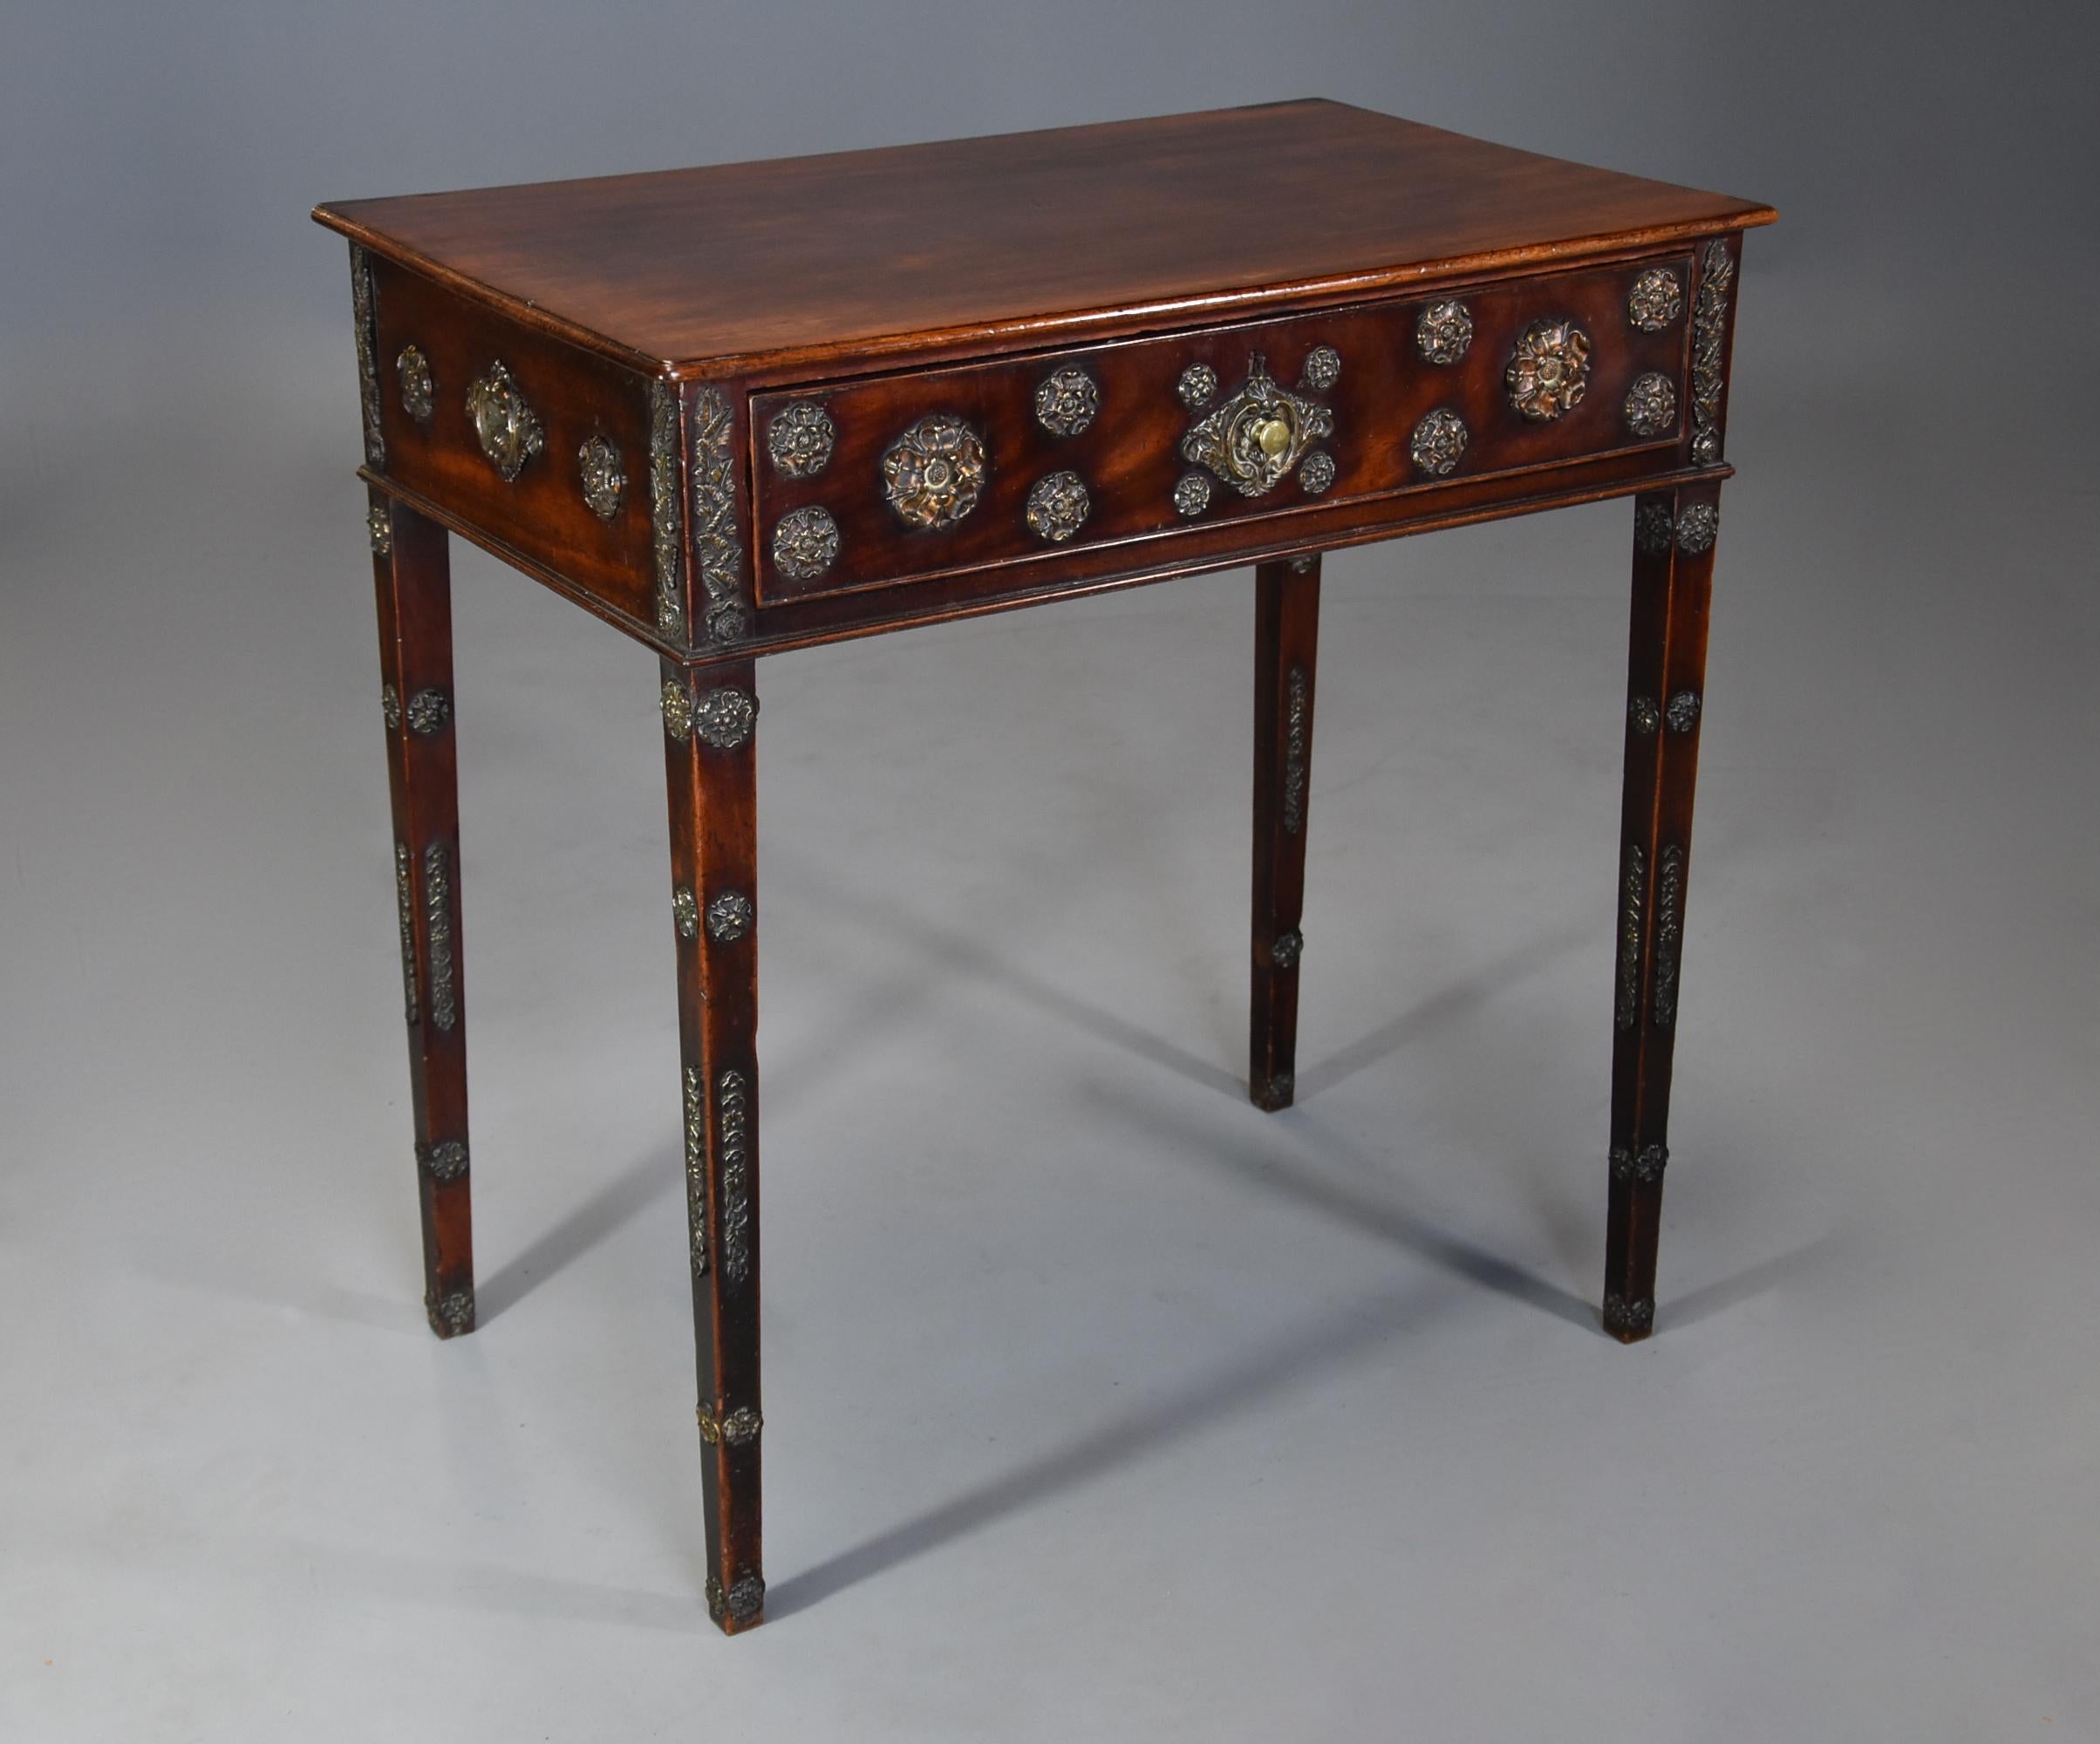 An unusual and highly decorative late 18th century mahogany side table of good patina with later applied brass paterae and mount decoration, the table dating to around 1790 and the mounts probably added around 1820-1830.

The table consists of a